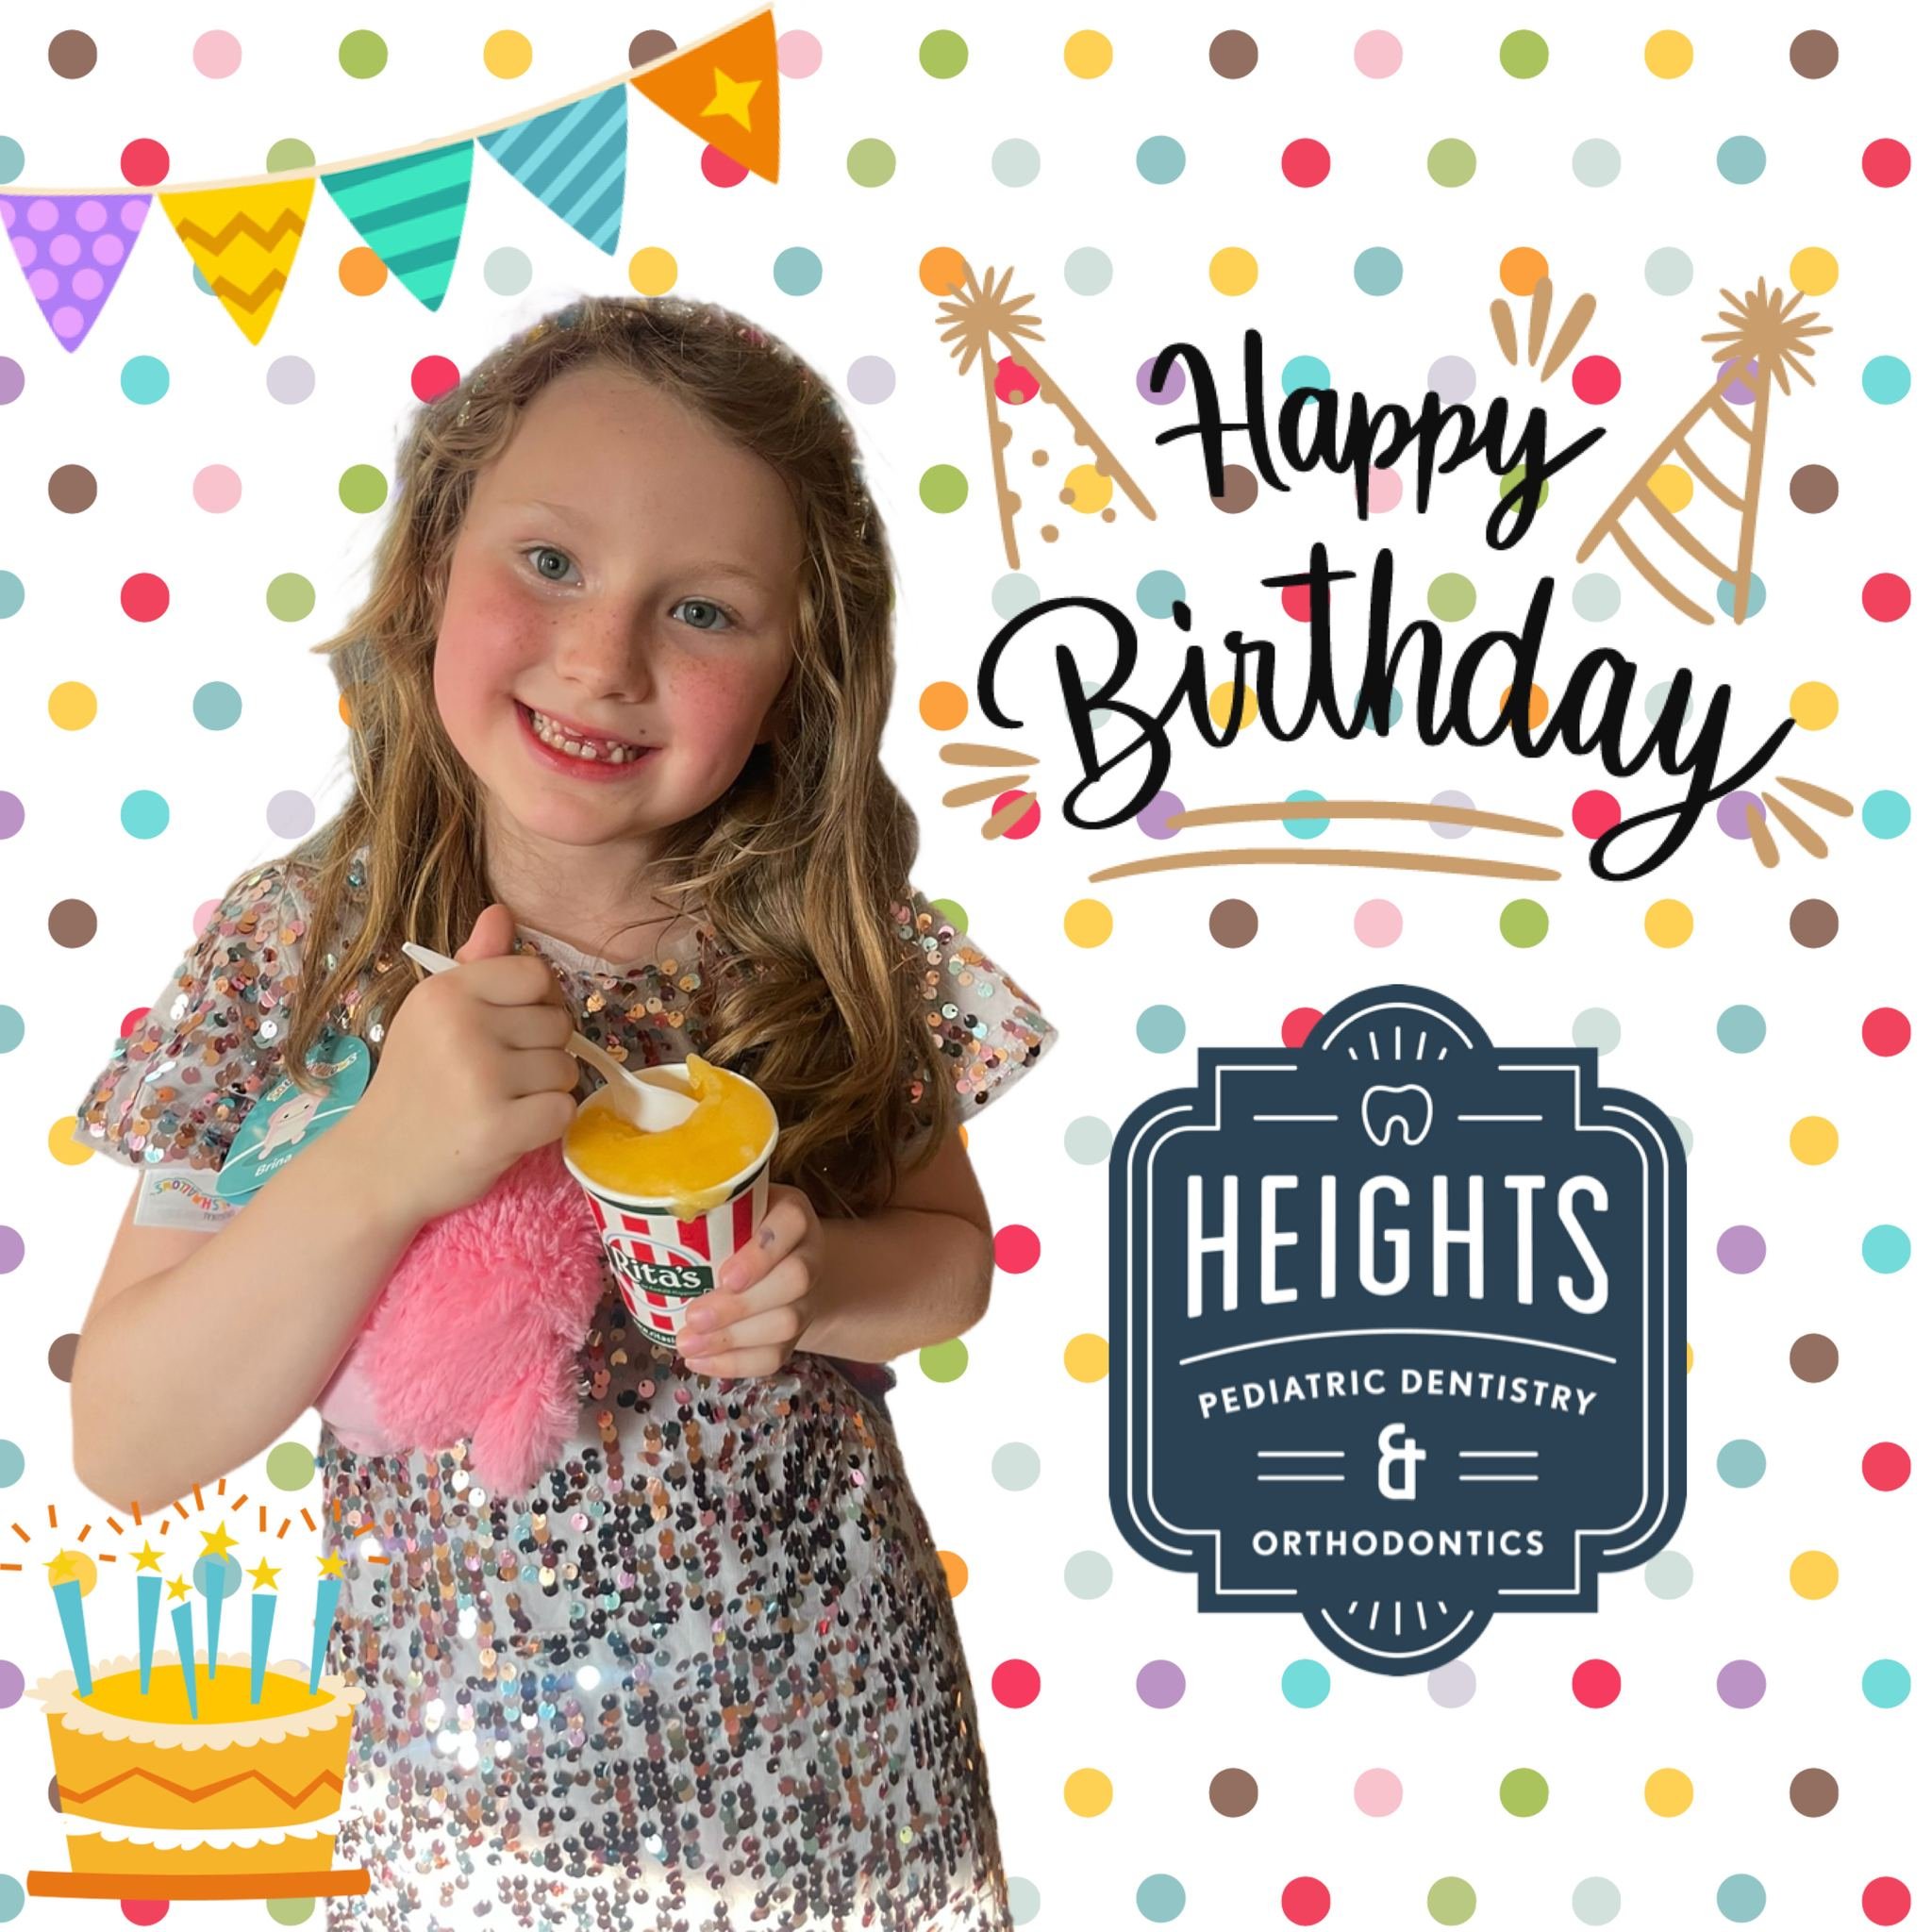 Congratulations to our quarterly birthday party winner!! 🥳 We hope you had a blast! Happy birthday! 🎂

Enter your name in our birthday party box at the front desk for YOUR chance to win a birthday party sponsored by HPDO! 🎁